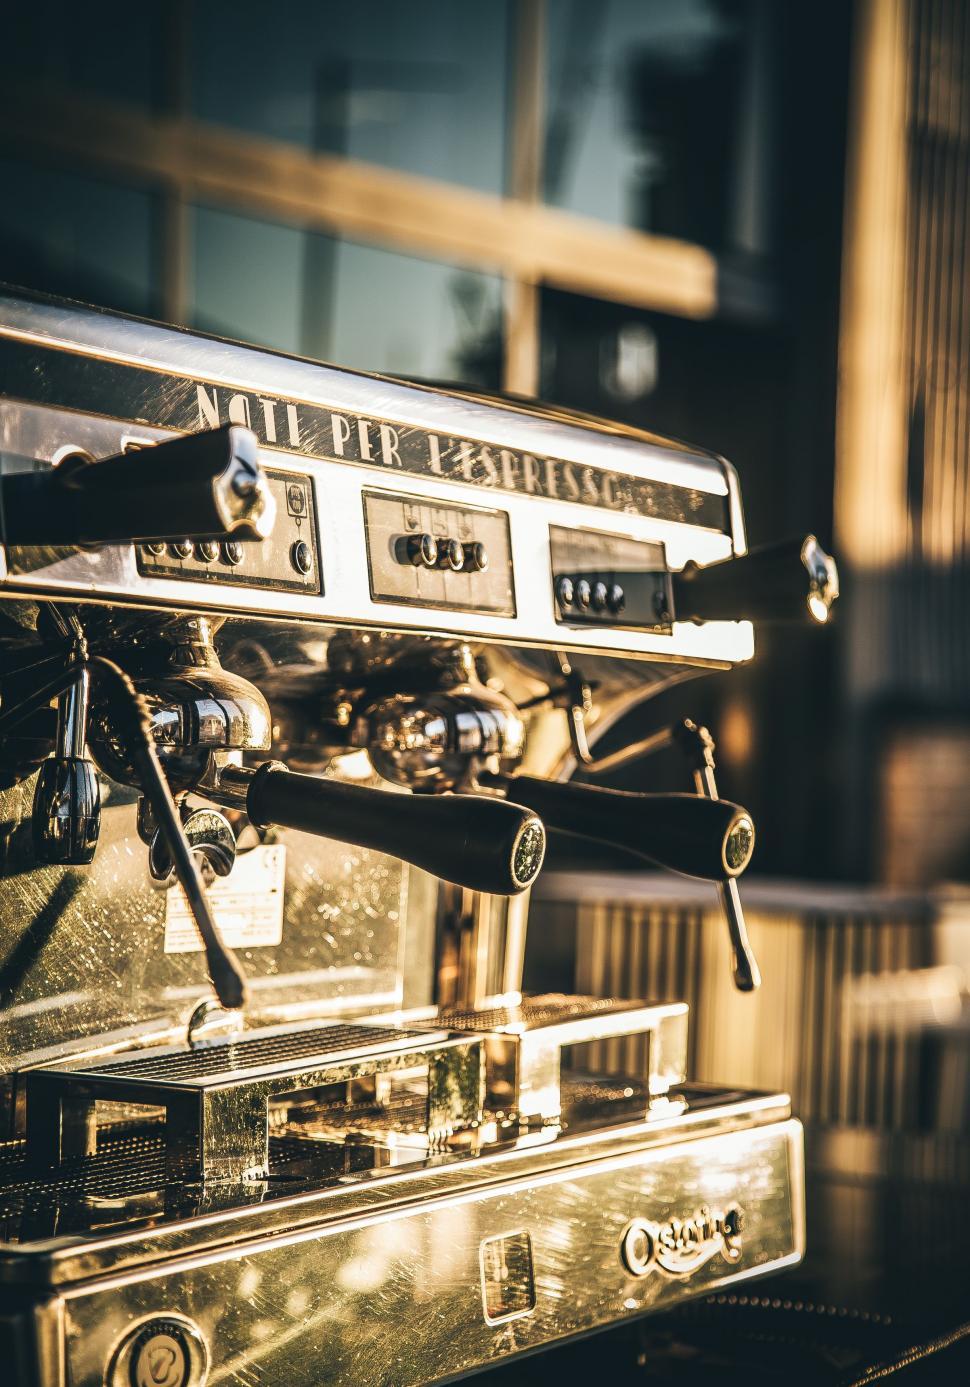 Free Image of Coffee Machine on Wooden Table 